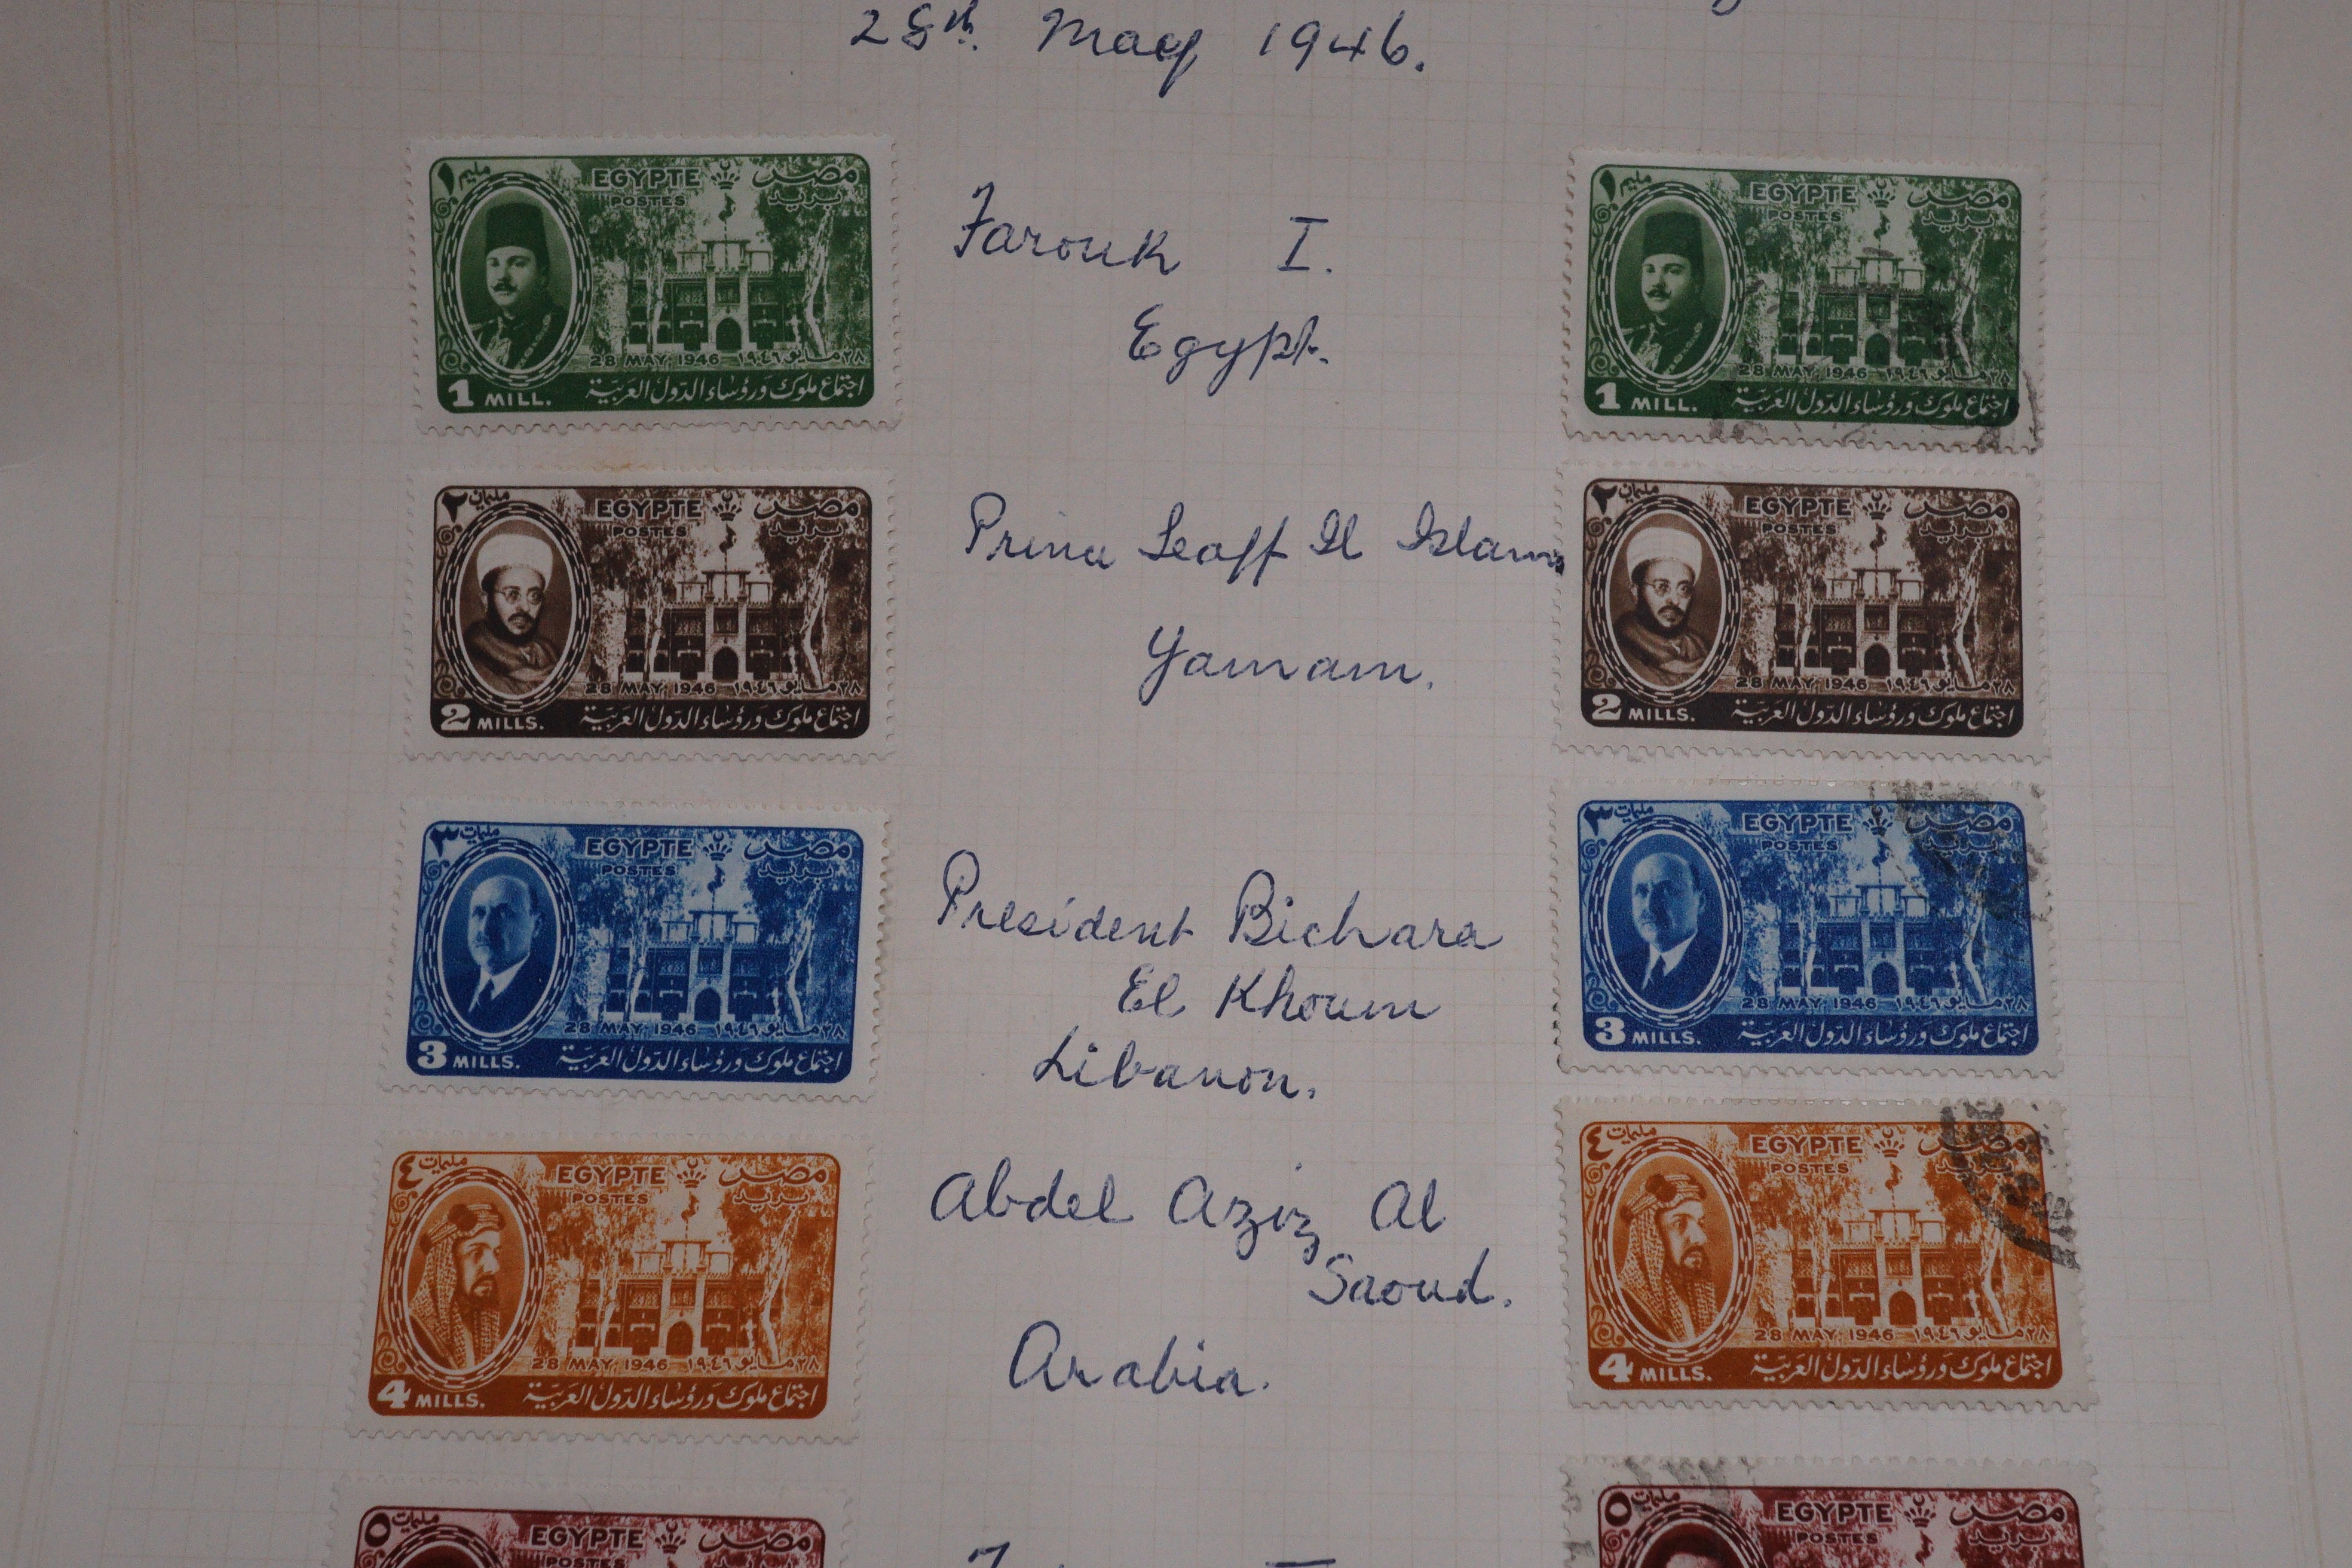 An album of Egypt stamps King Farouk, Egypt occupation stamps, a collection of Afghanistan, Pakistan and Turkey, Persia stamps, 19th century U.S. stamps, Russian, Australia and QEII Tristan da Cunha, Germany, Hungary and